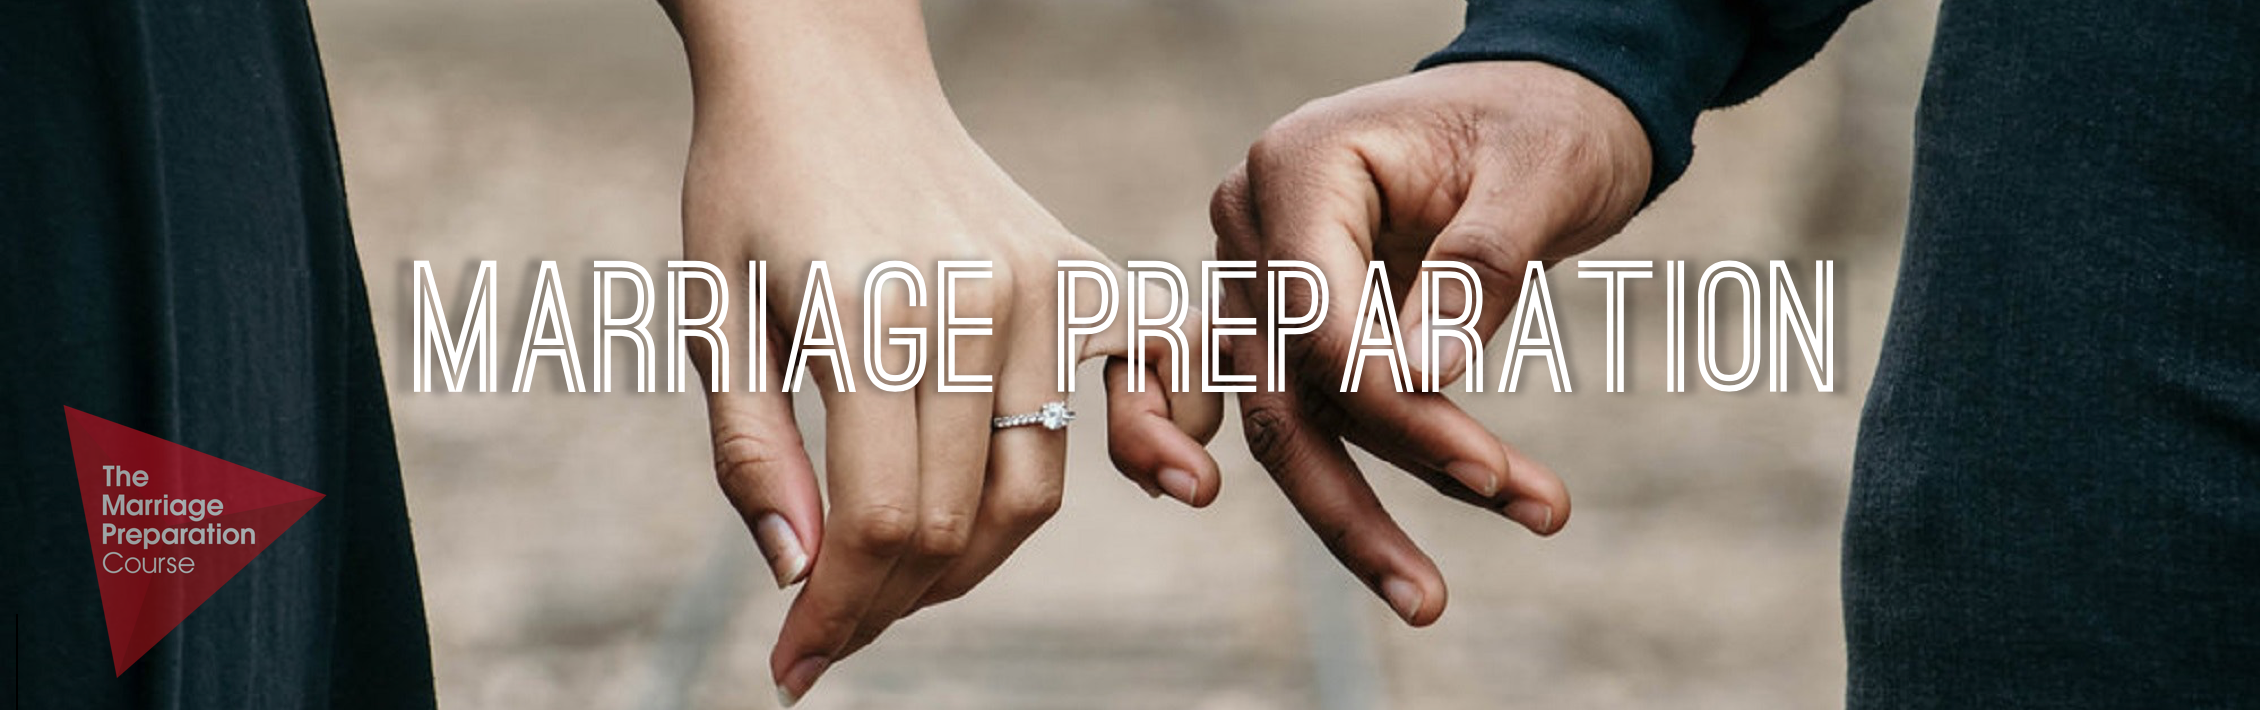 Online free marriage preparation course 